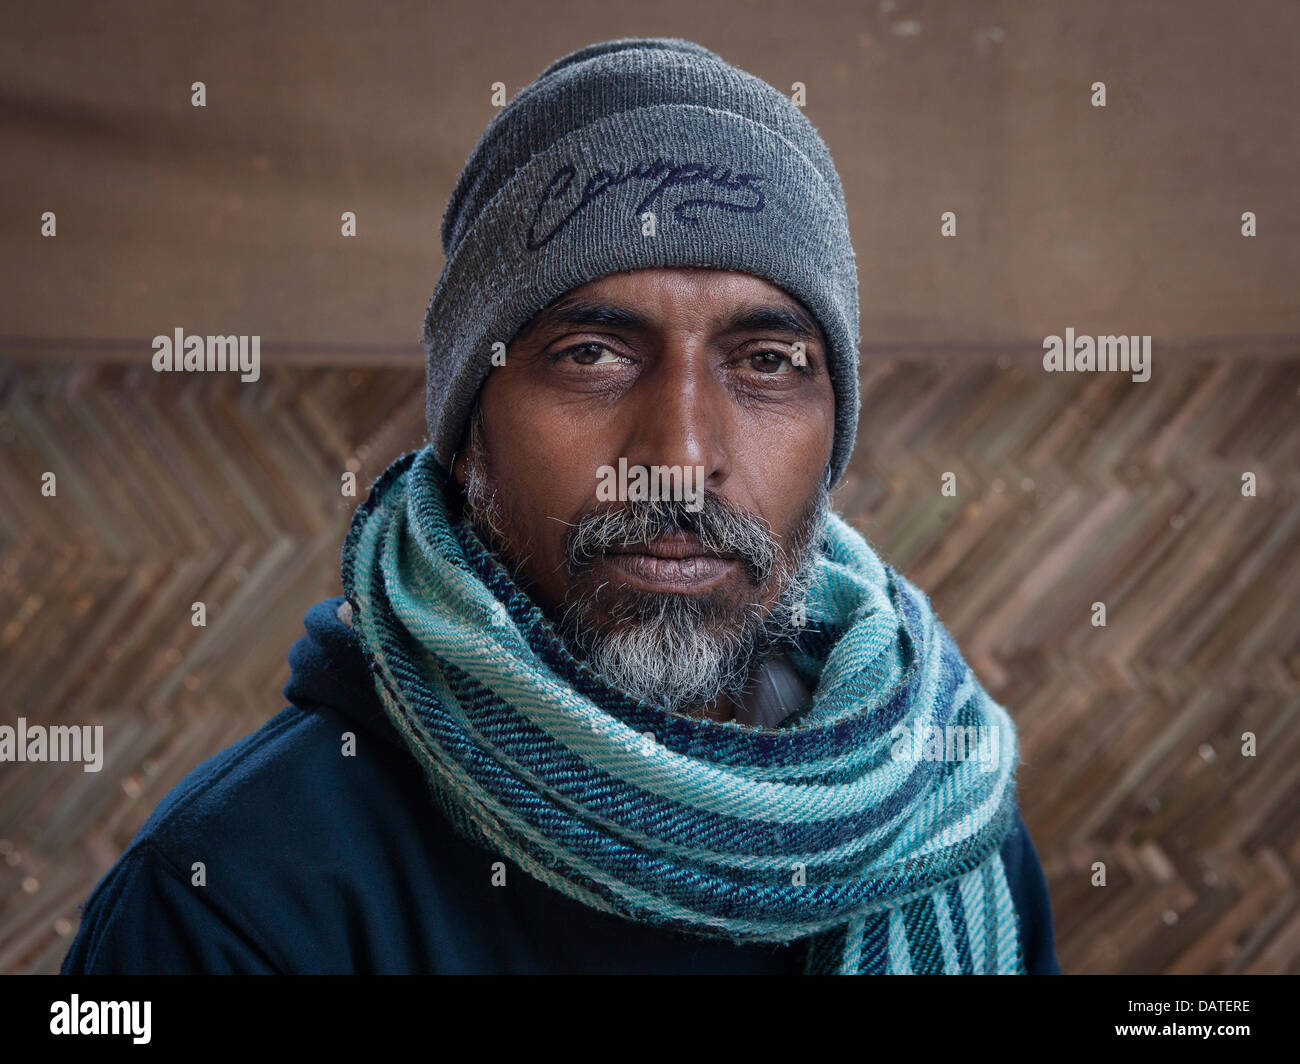 Portrait of a local man at the Kumbh Mela 2013 in Allahabad, India Stock Photo